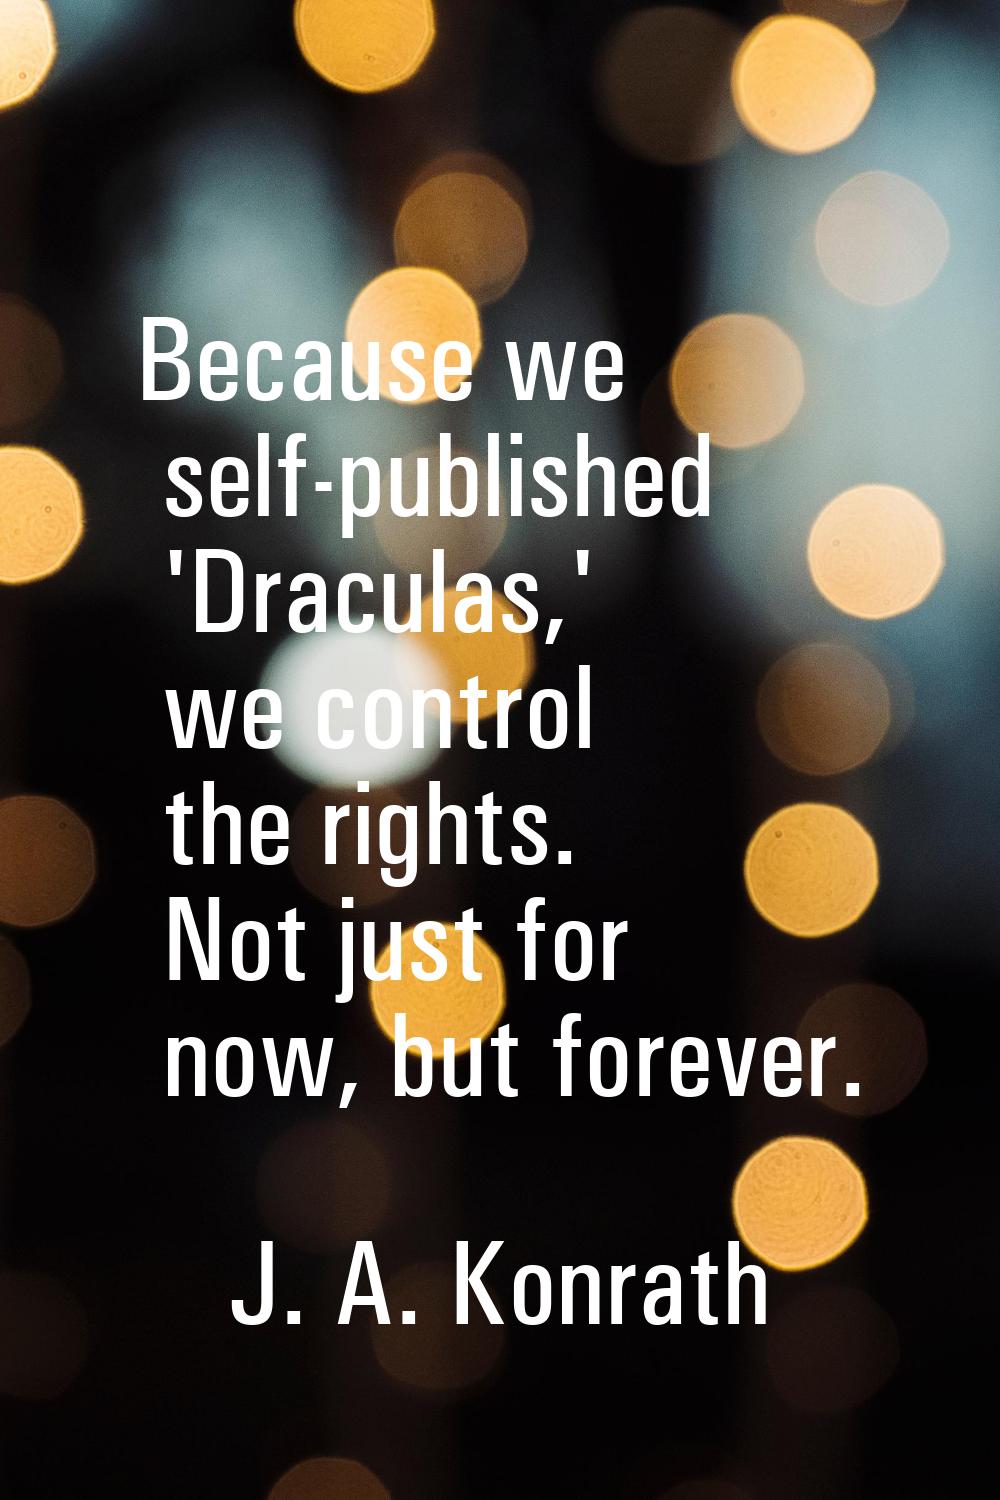 Because we self-published 'Draculas,' we control the rights. Not just for now, but forever.